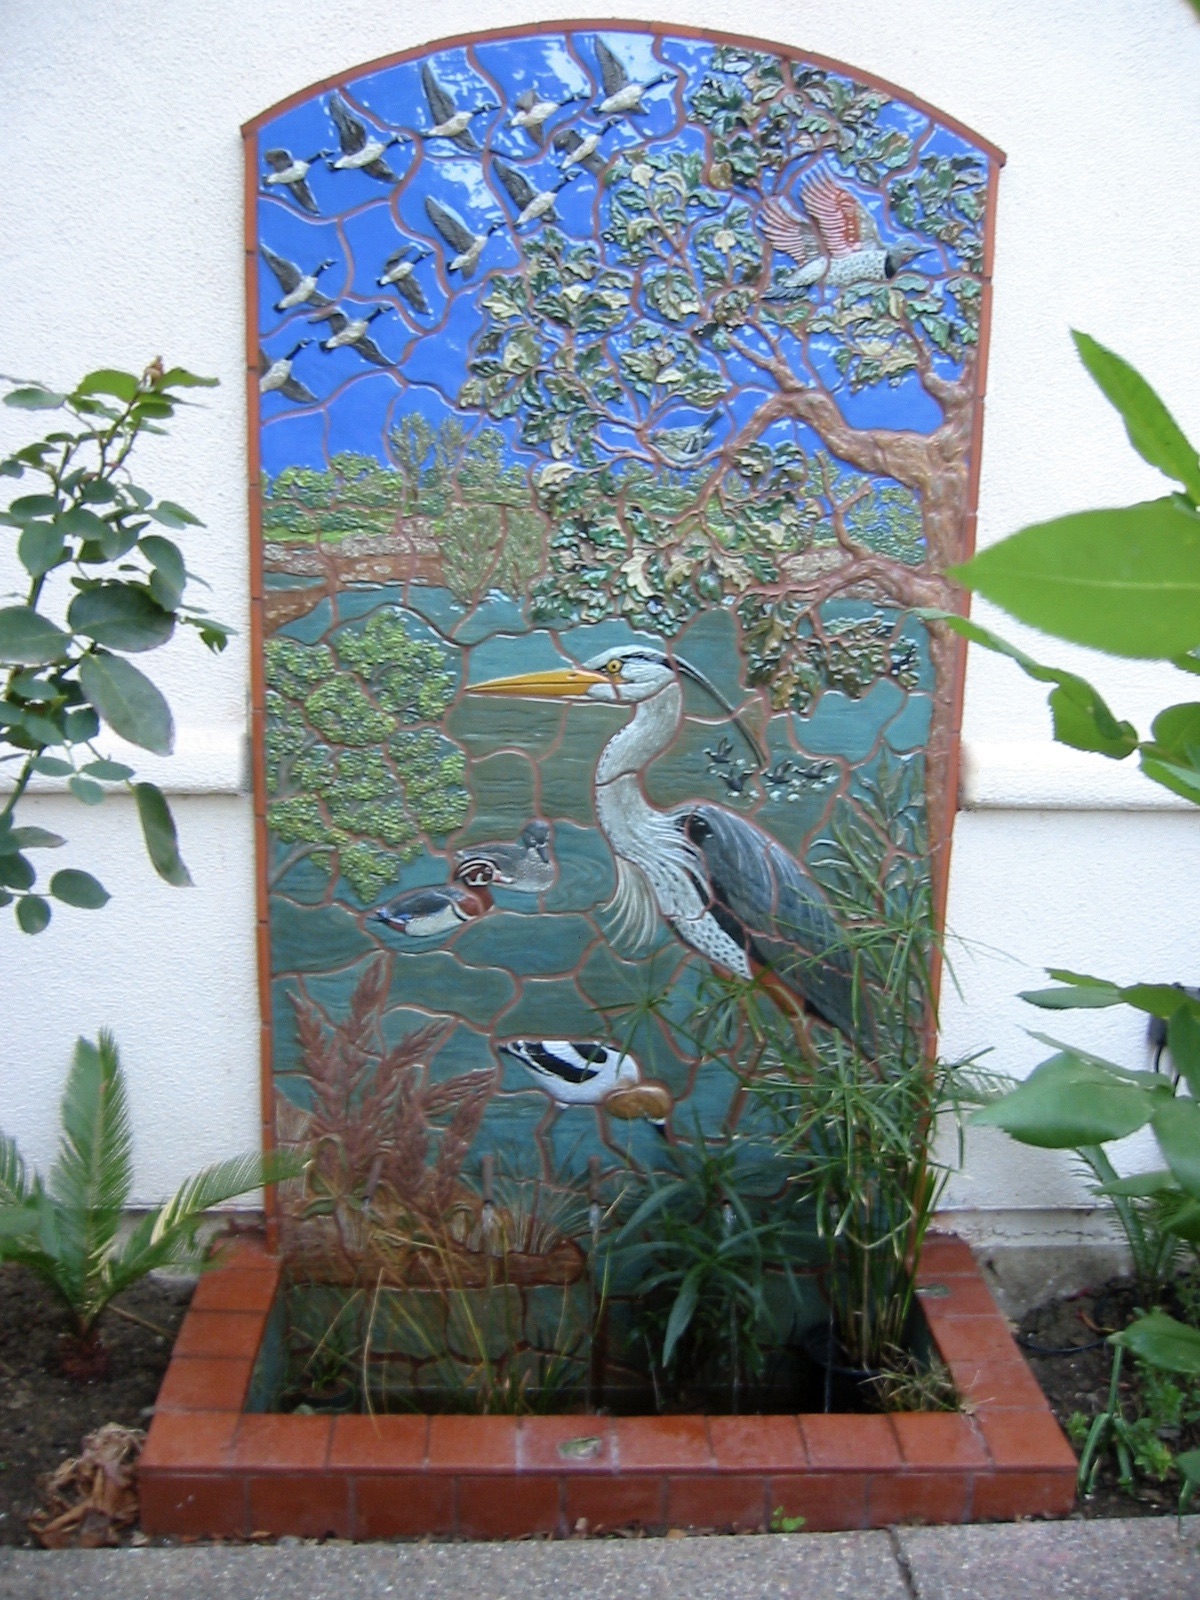 Carved Ceramic Fountain Mural with Heron and Waterfowl Design 